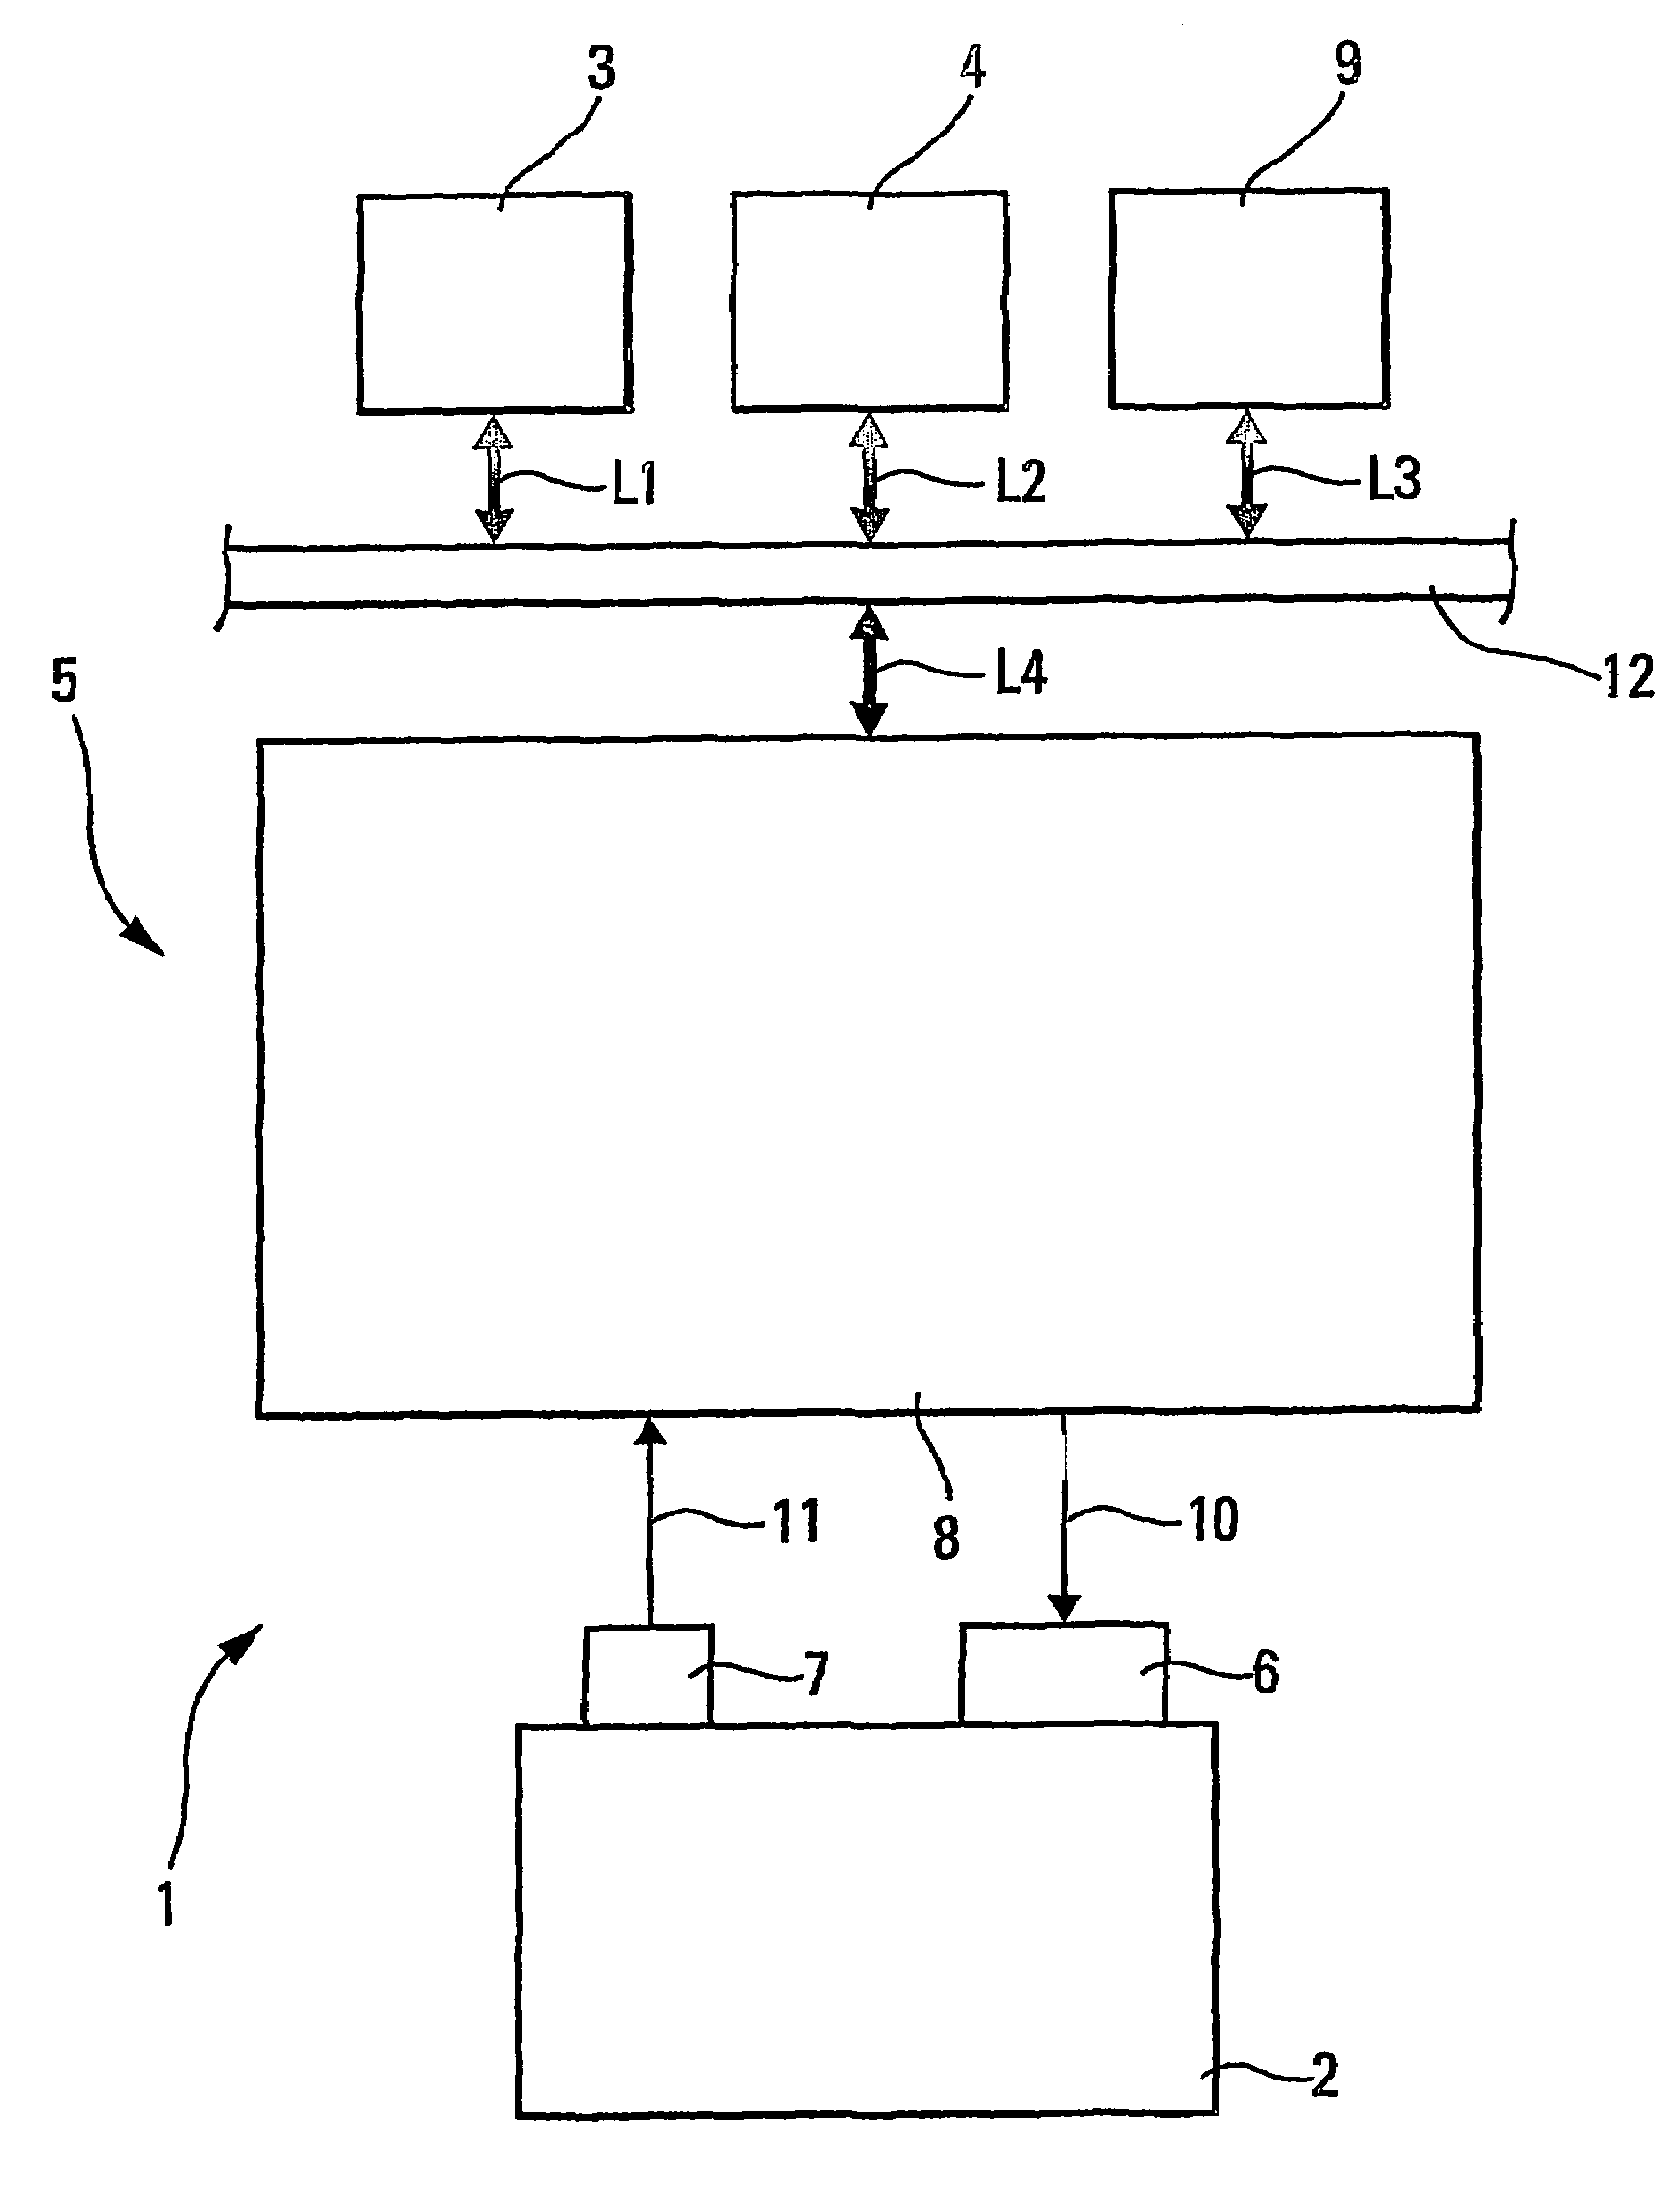 System for controlling the operation of at least one aircraft engine